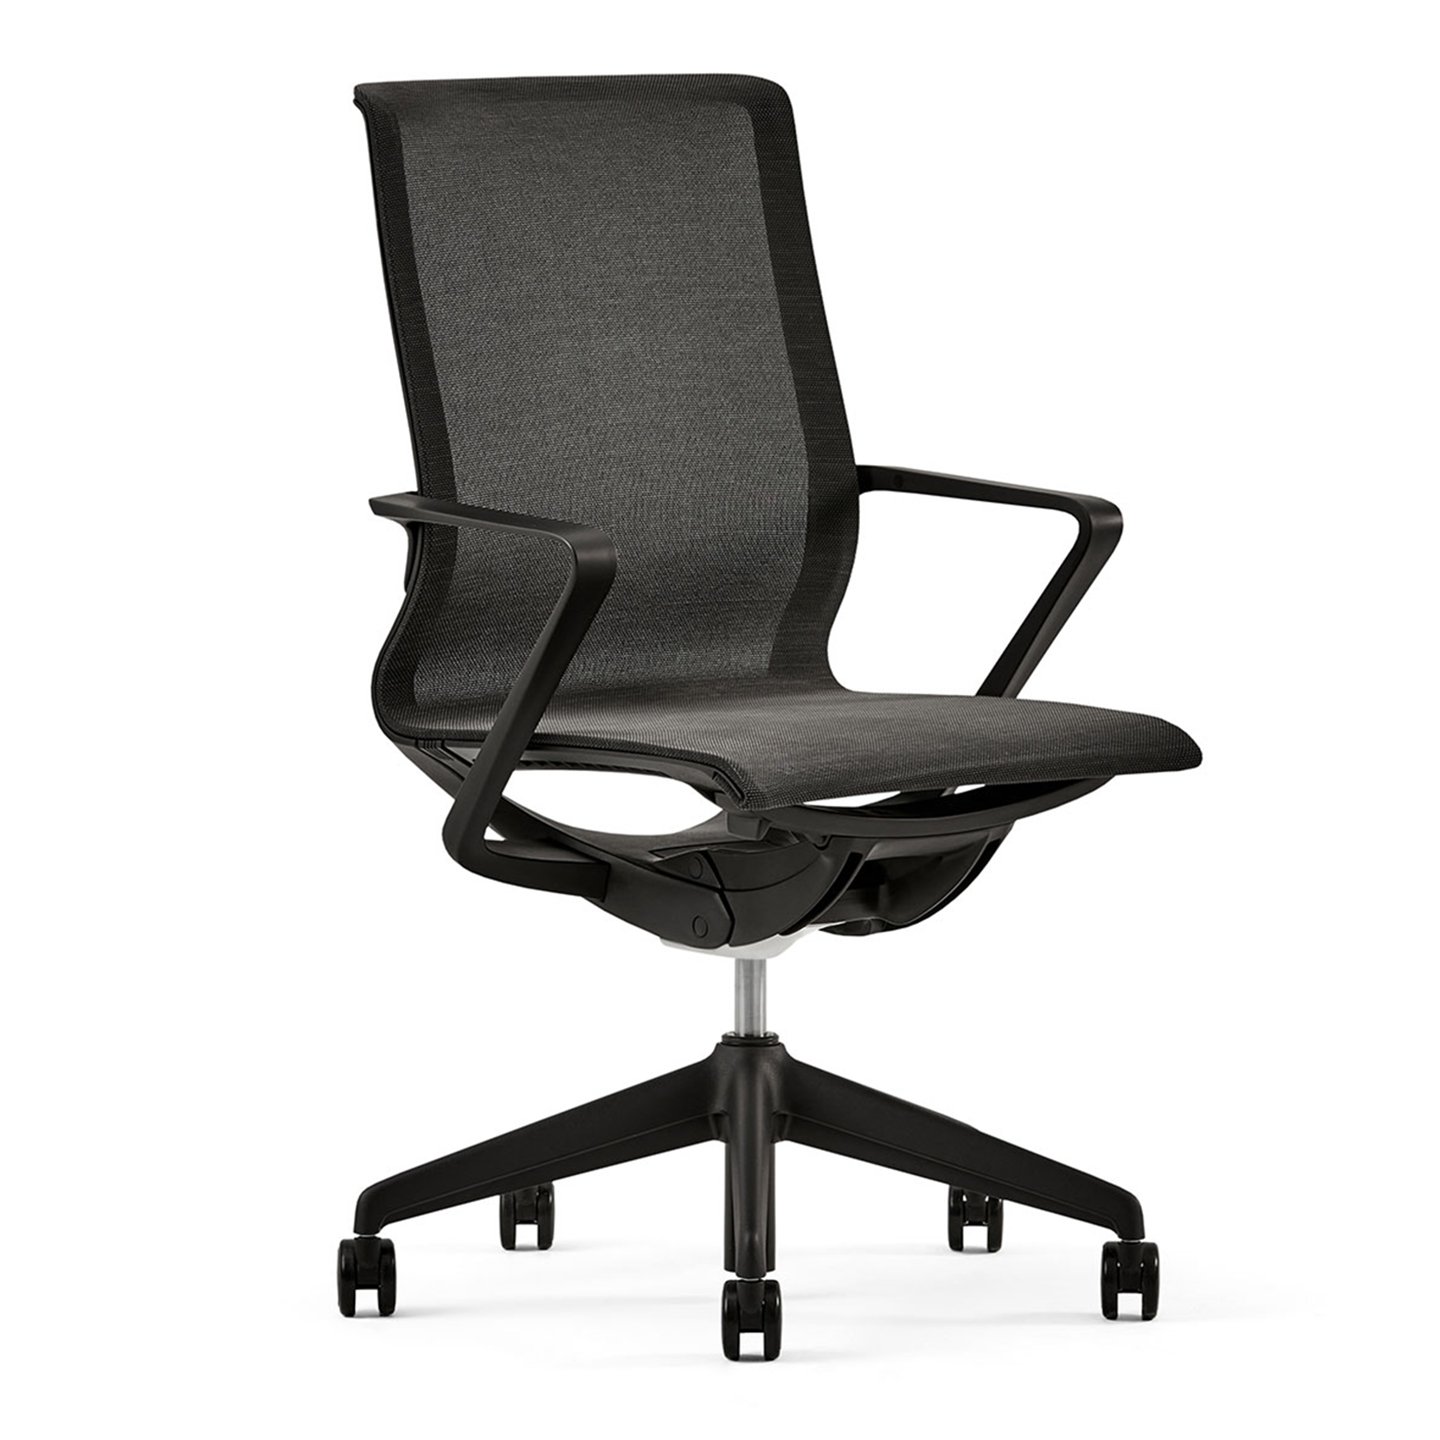 Conference Chair | Haworth